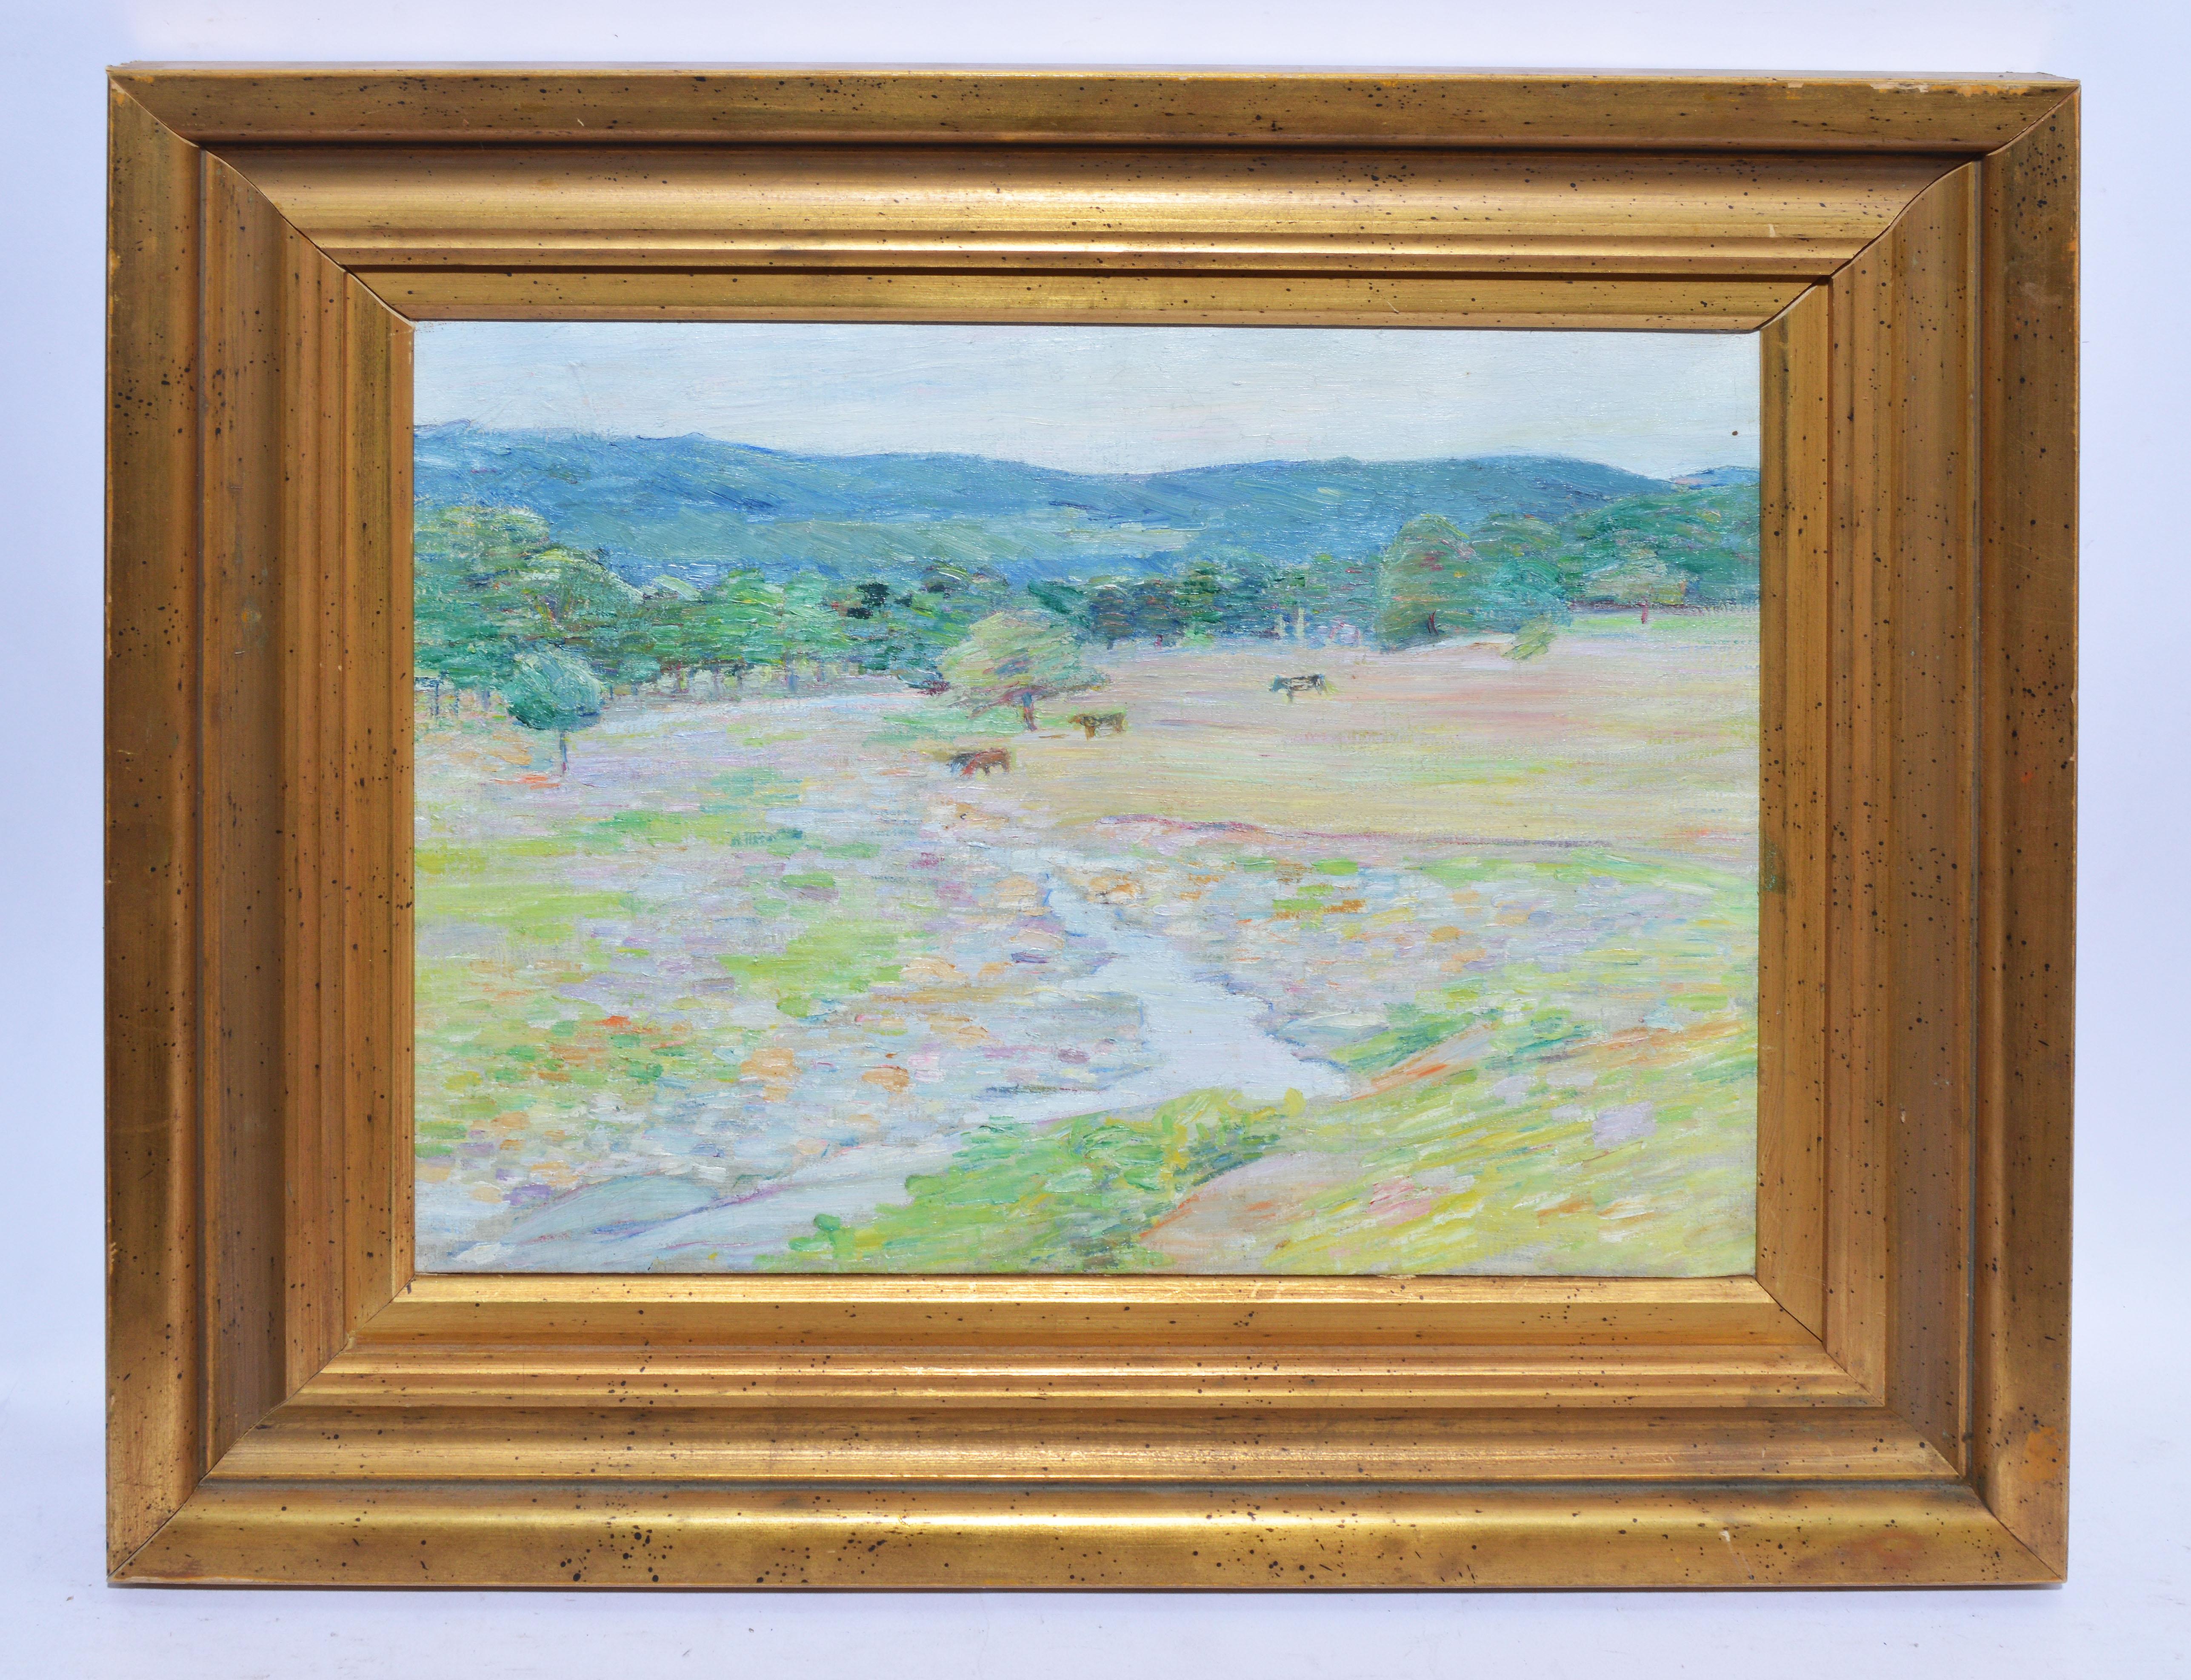 Impressionist view of a landscape with cows by Lucy Hariot Booth  (1869 - 1952).  Oil on canvas, circa 1920.  Estate stamped verso.  Displayed in a giltwood frame.  Image, 20